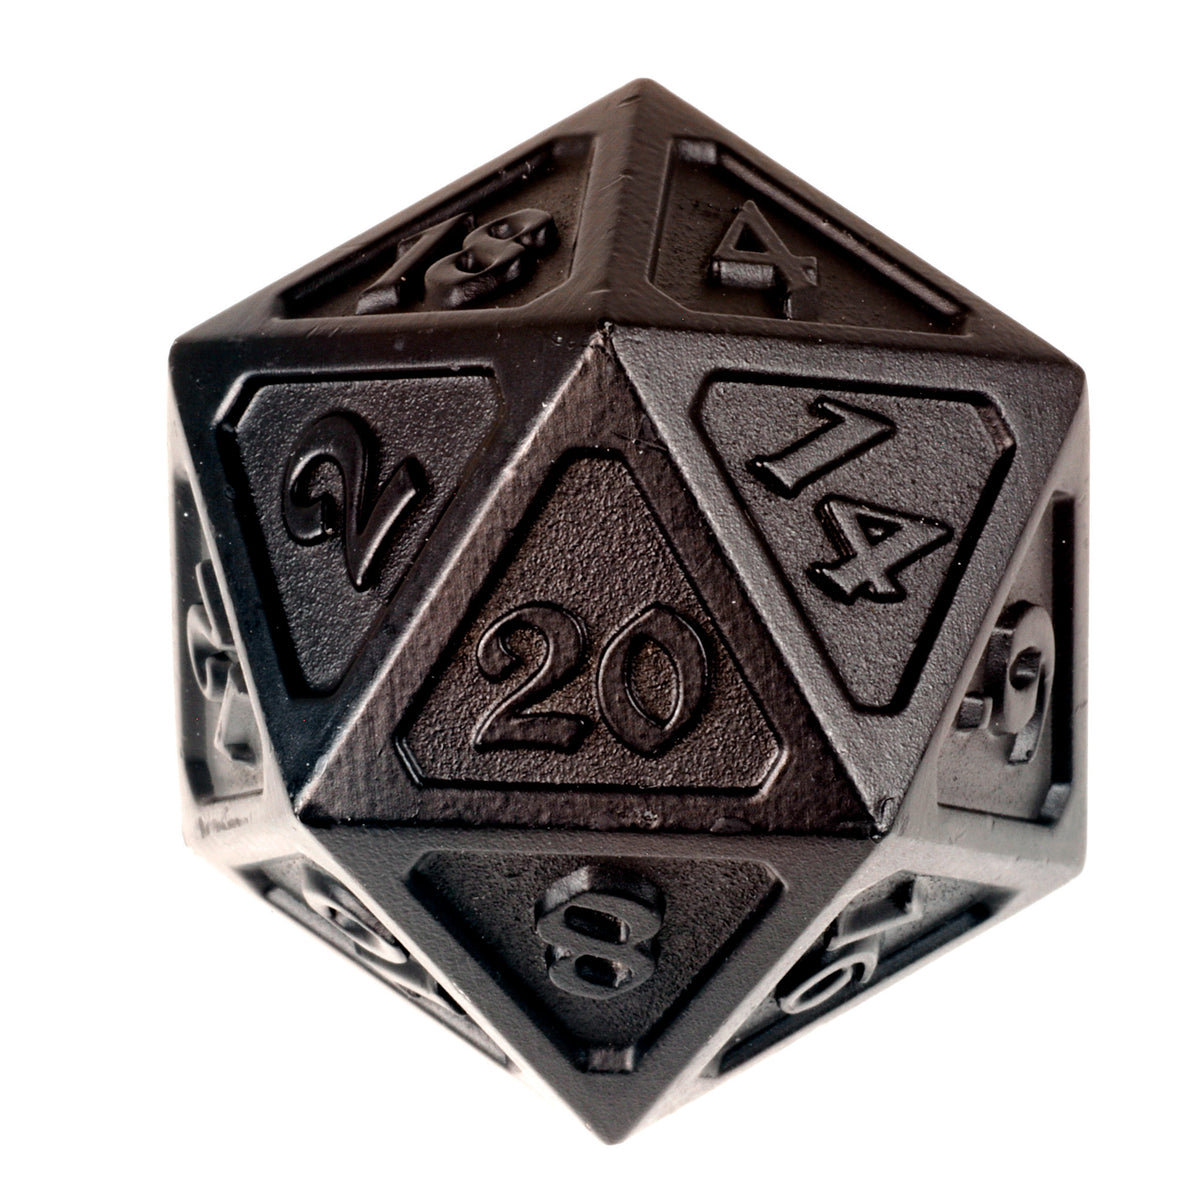 Dire d20 – Mythica Absolute Midnight